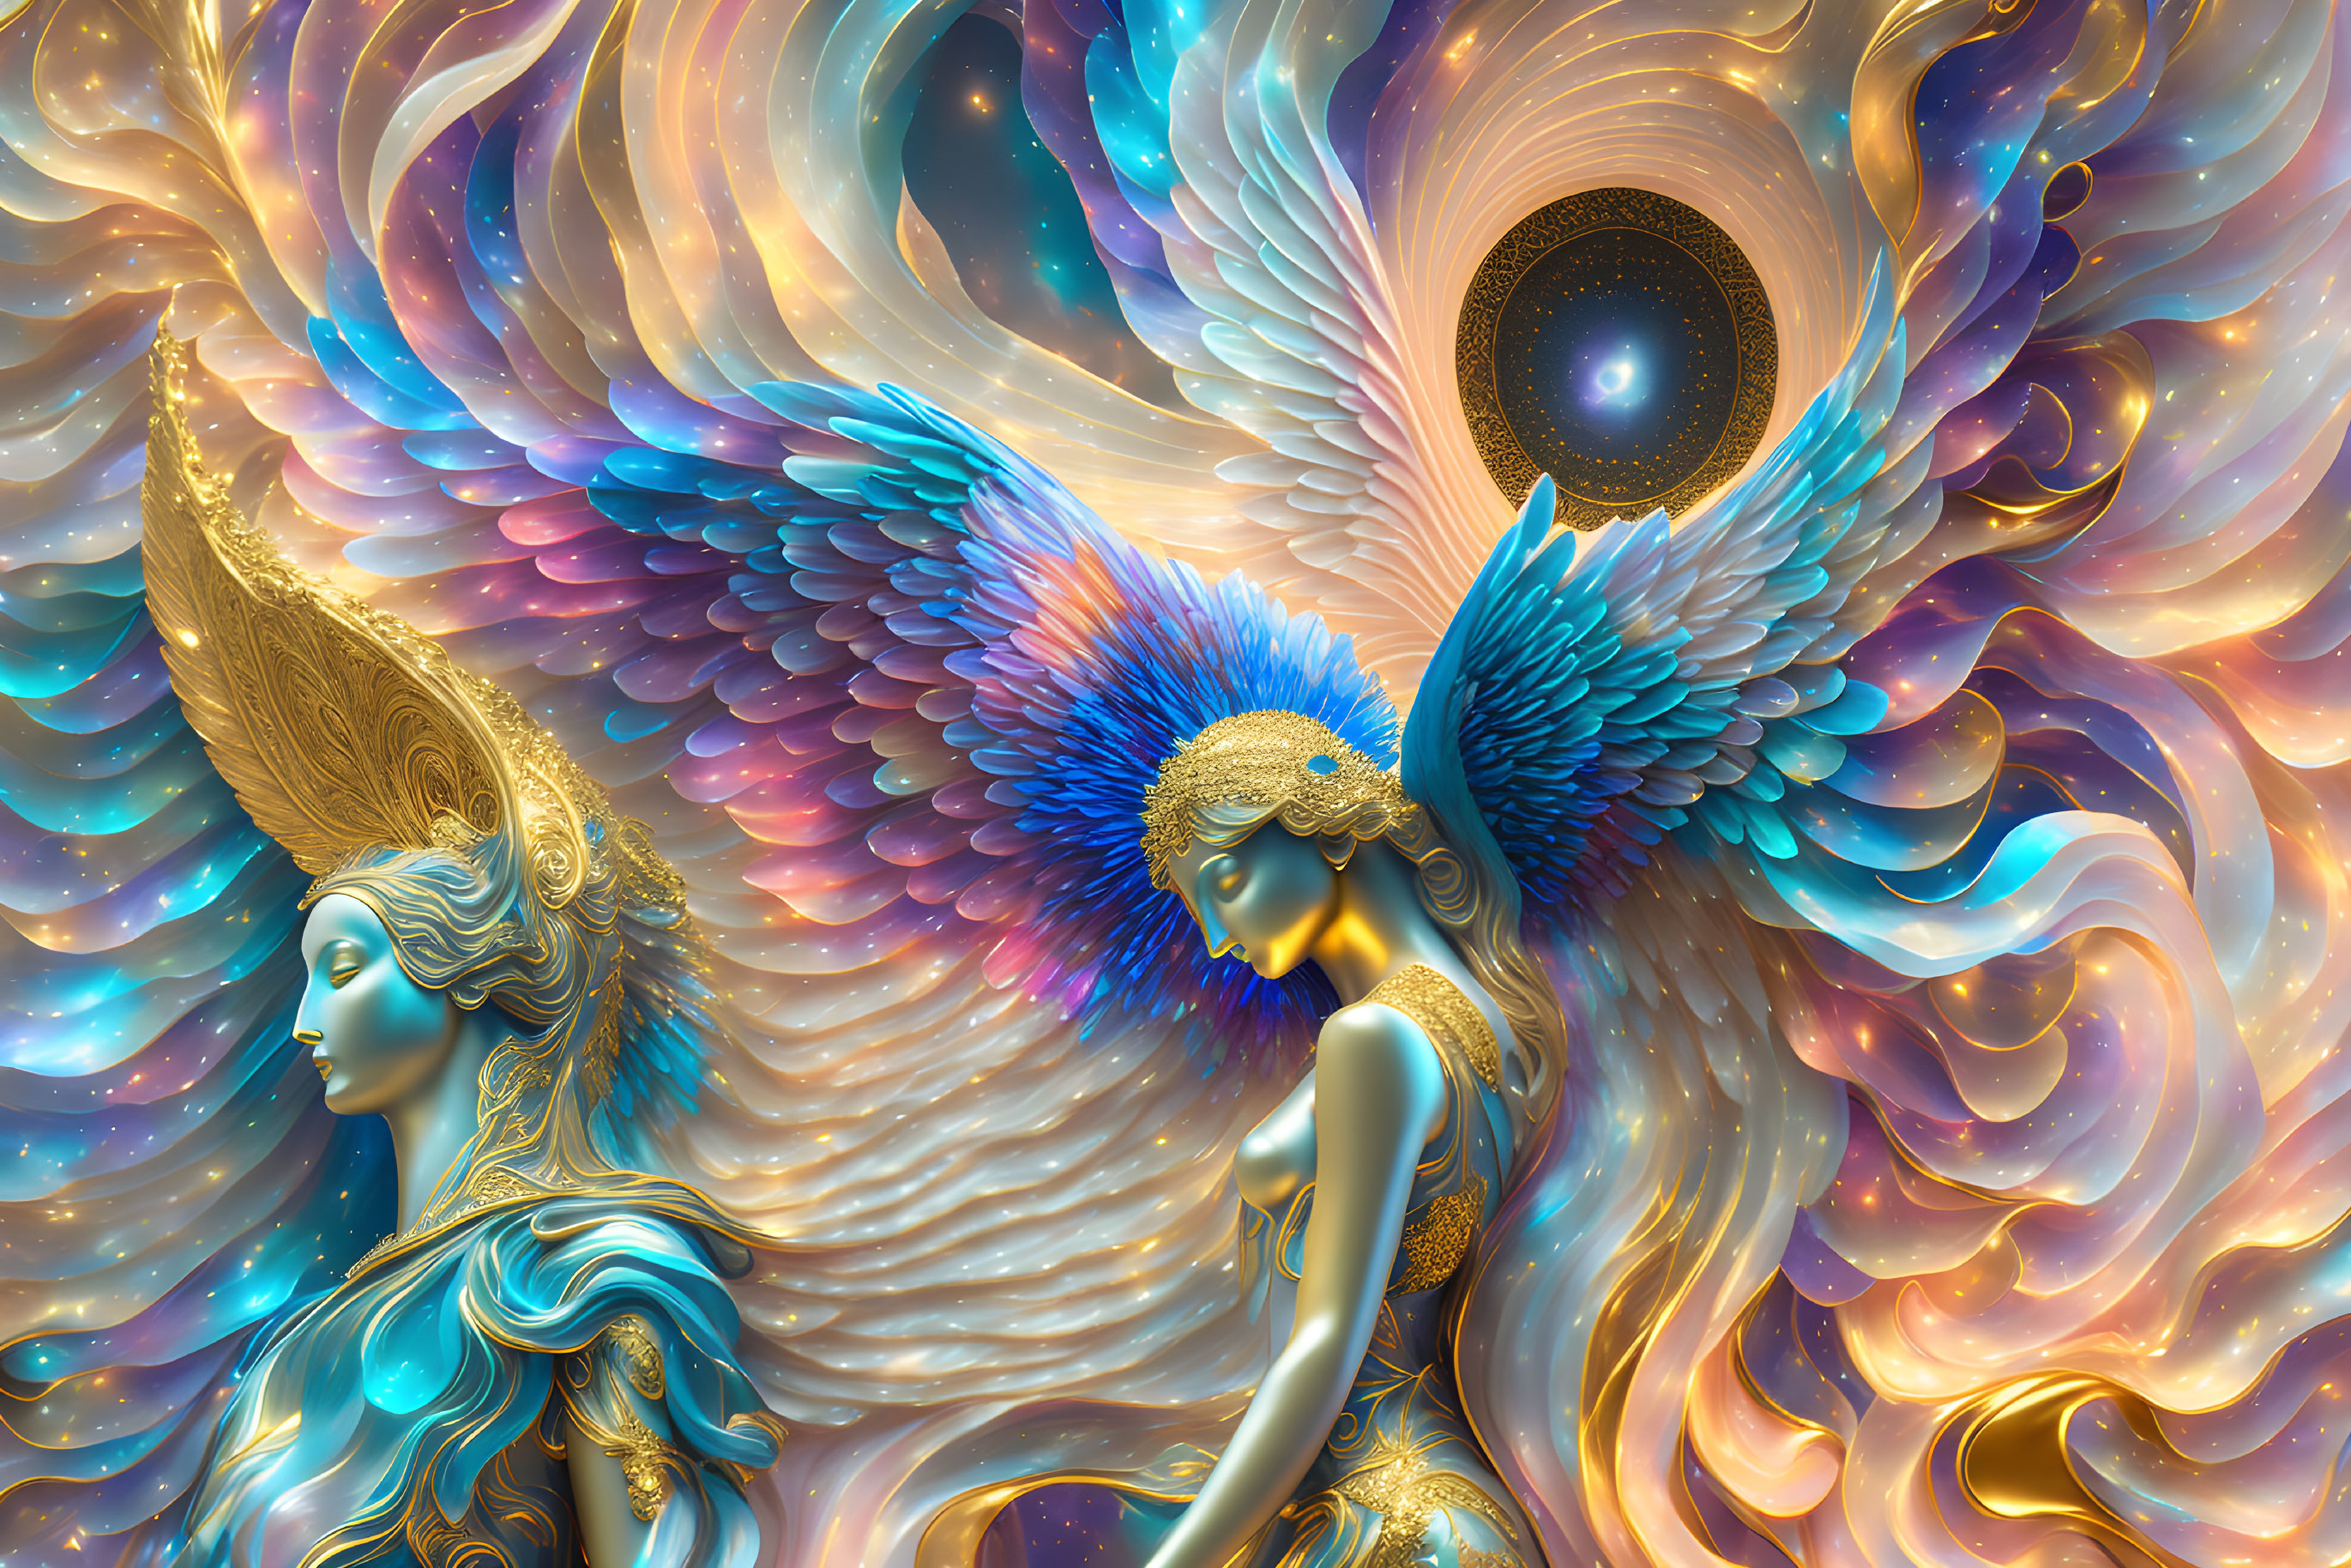 Ethereal figures with ornate wings in colorful digital artwork